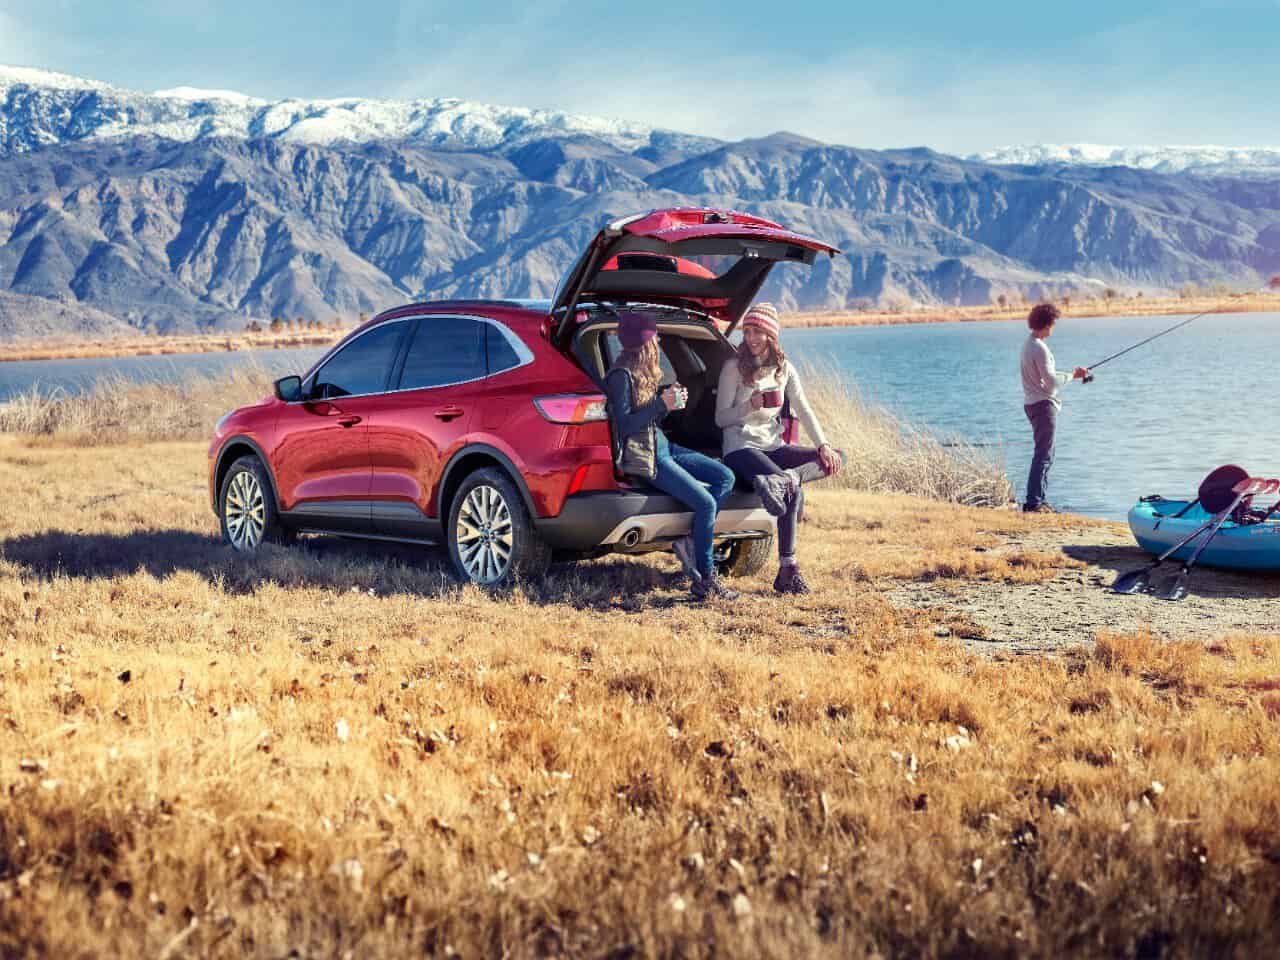 Image for: towing with a Ford escape shows two women resting in the back of a red Ford Escape, while a man is fishing in the background. 